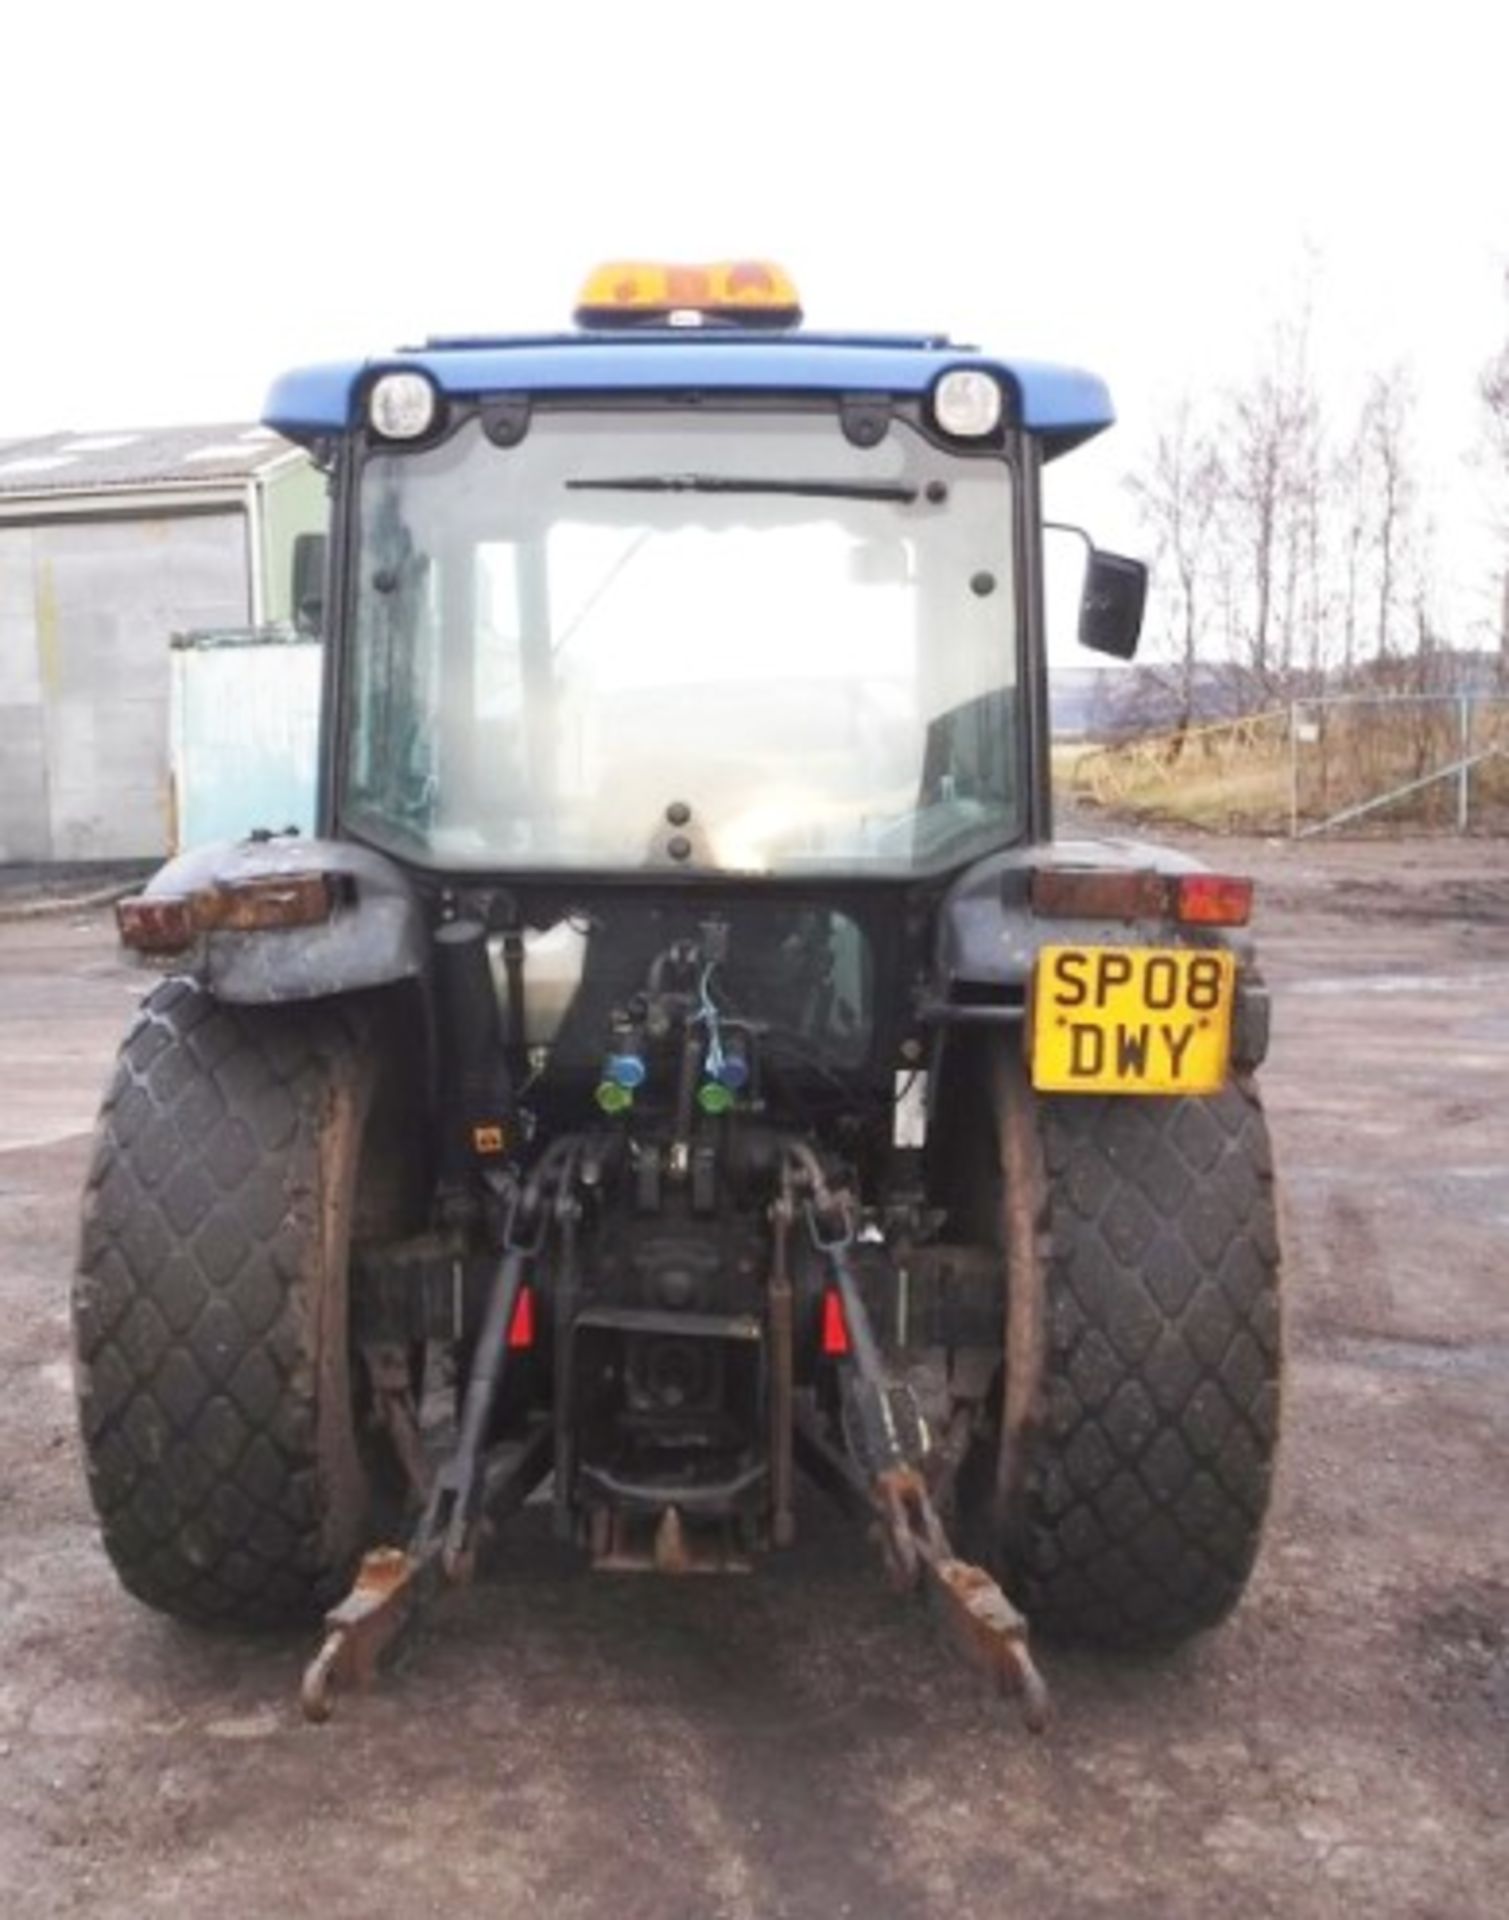 2008 NEW HOLLAND TN60 TRACTOR. REG NO SP08 DWY. SN 111054. GVW(TONNES) 4497, 3062HRS (NOT VERIFIED) - Image 3 of 40